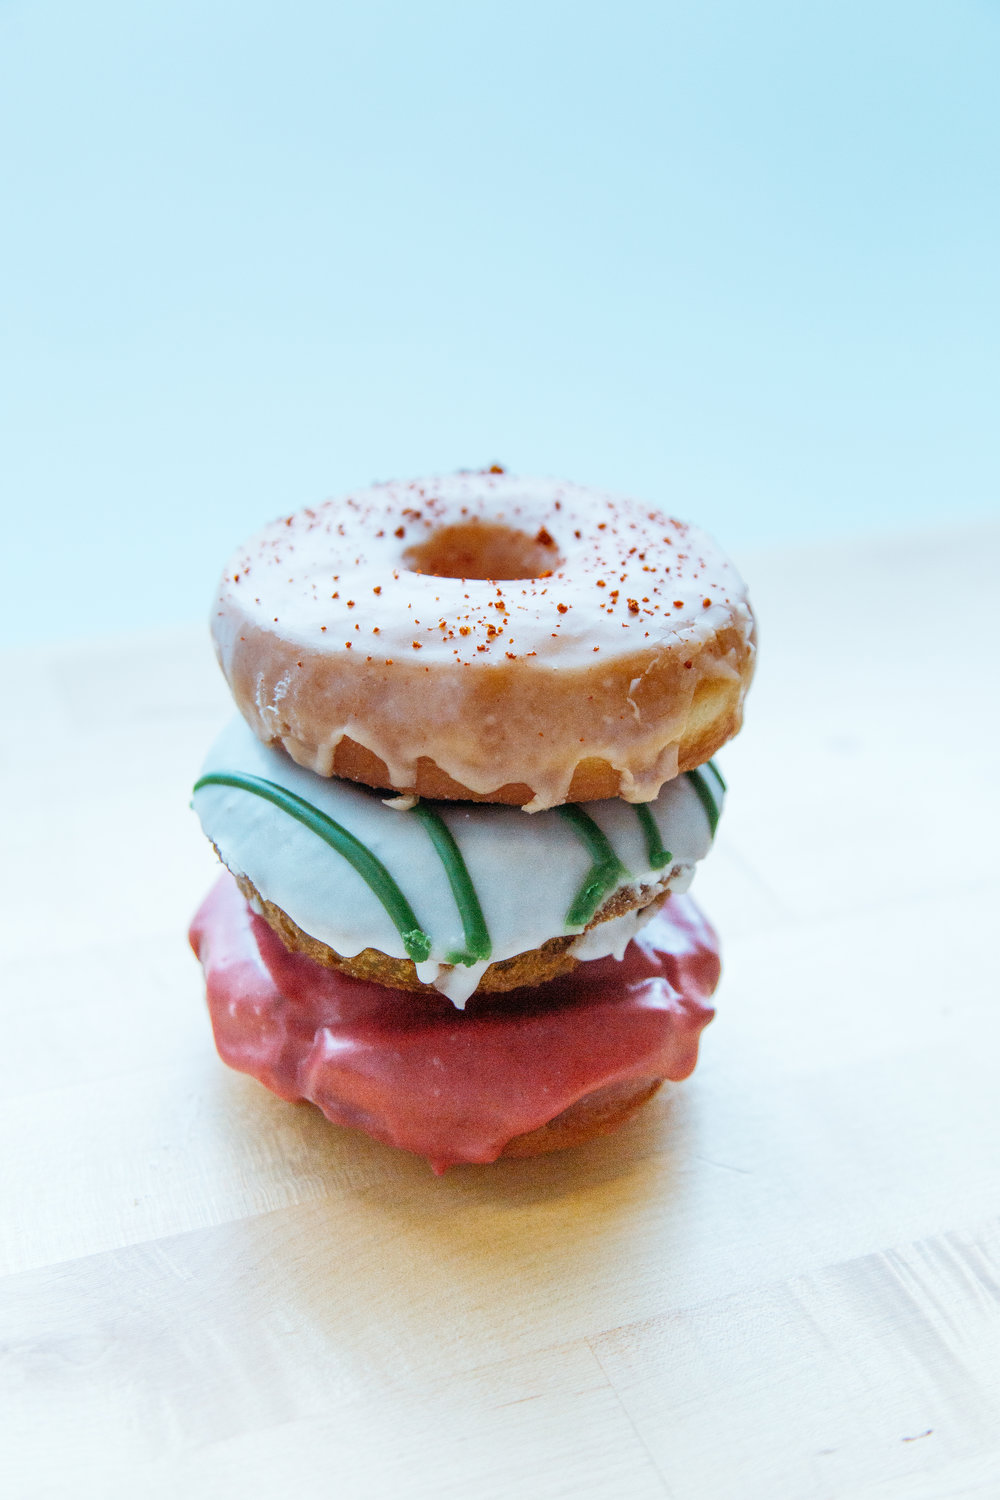 The Best 4 Donut Shops in Portland by Foodie Snitch